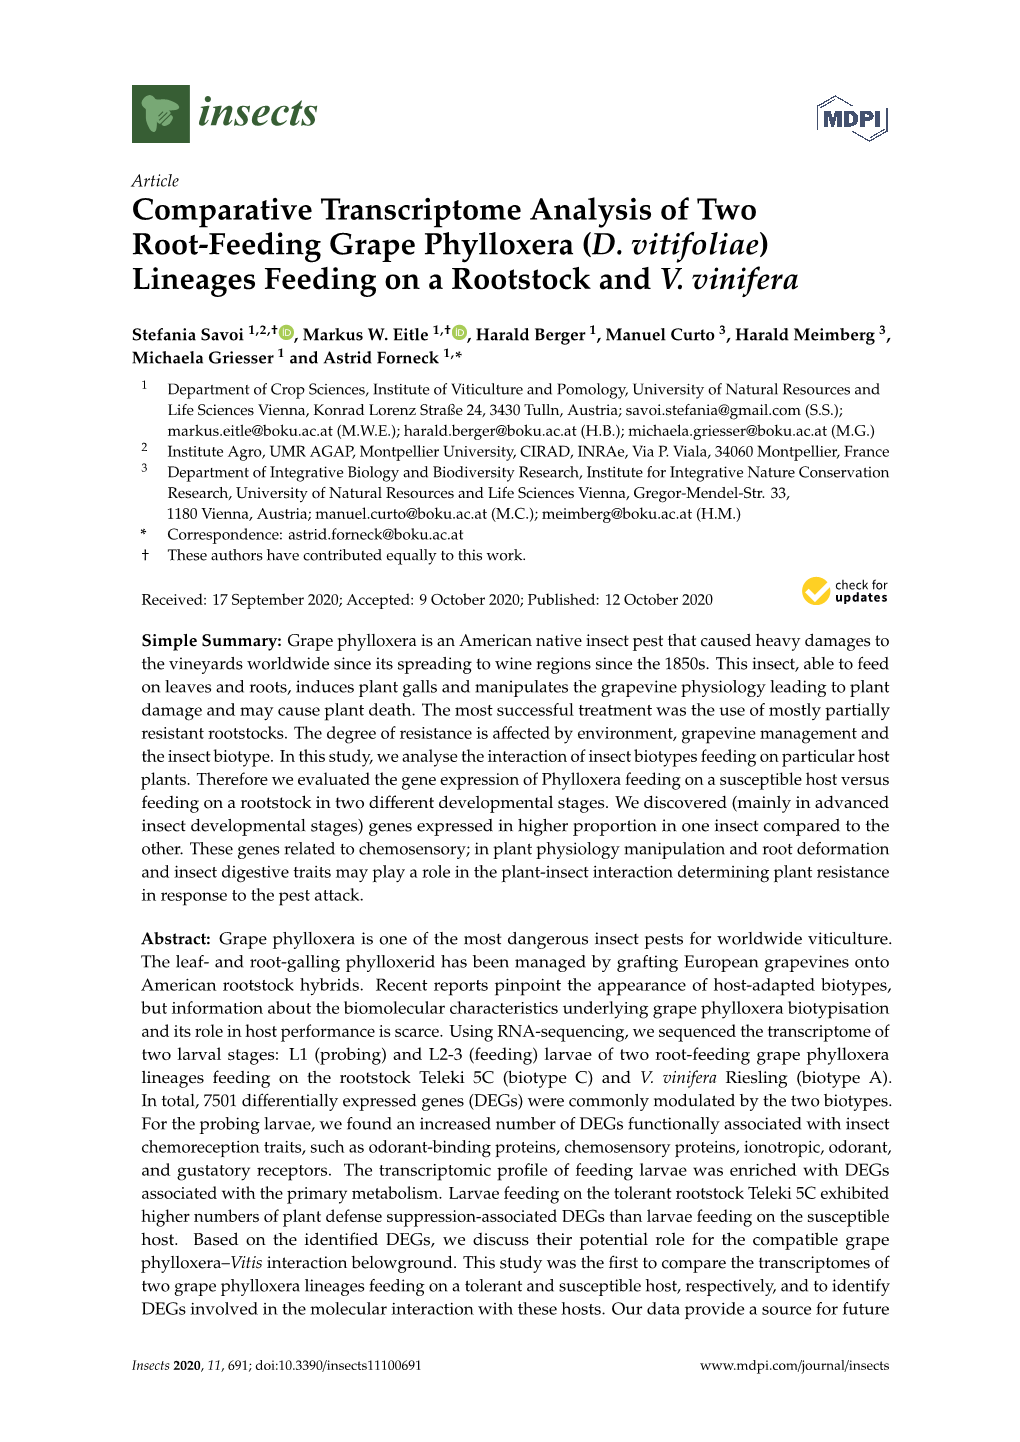 Comparative Transcriptome Analysis of Two Root-Feeding Grape Phylloxera (D